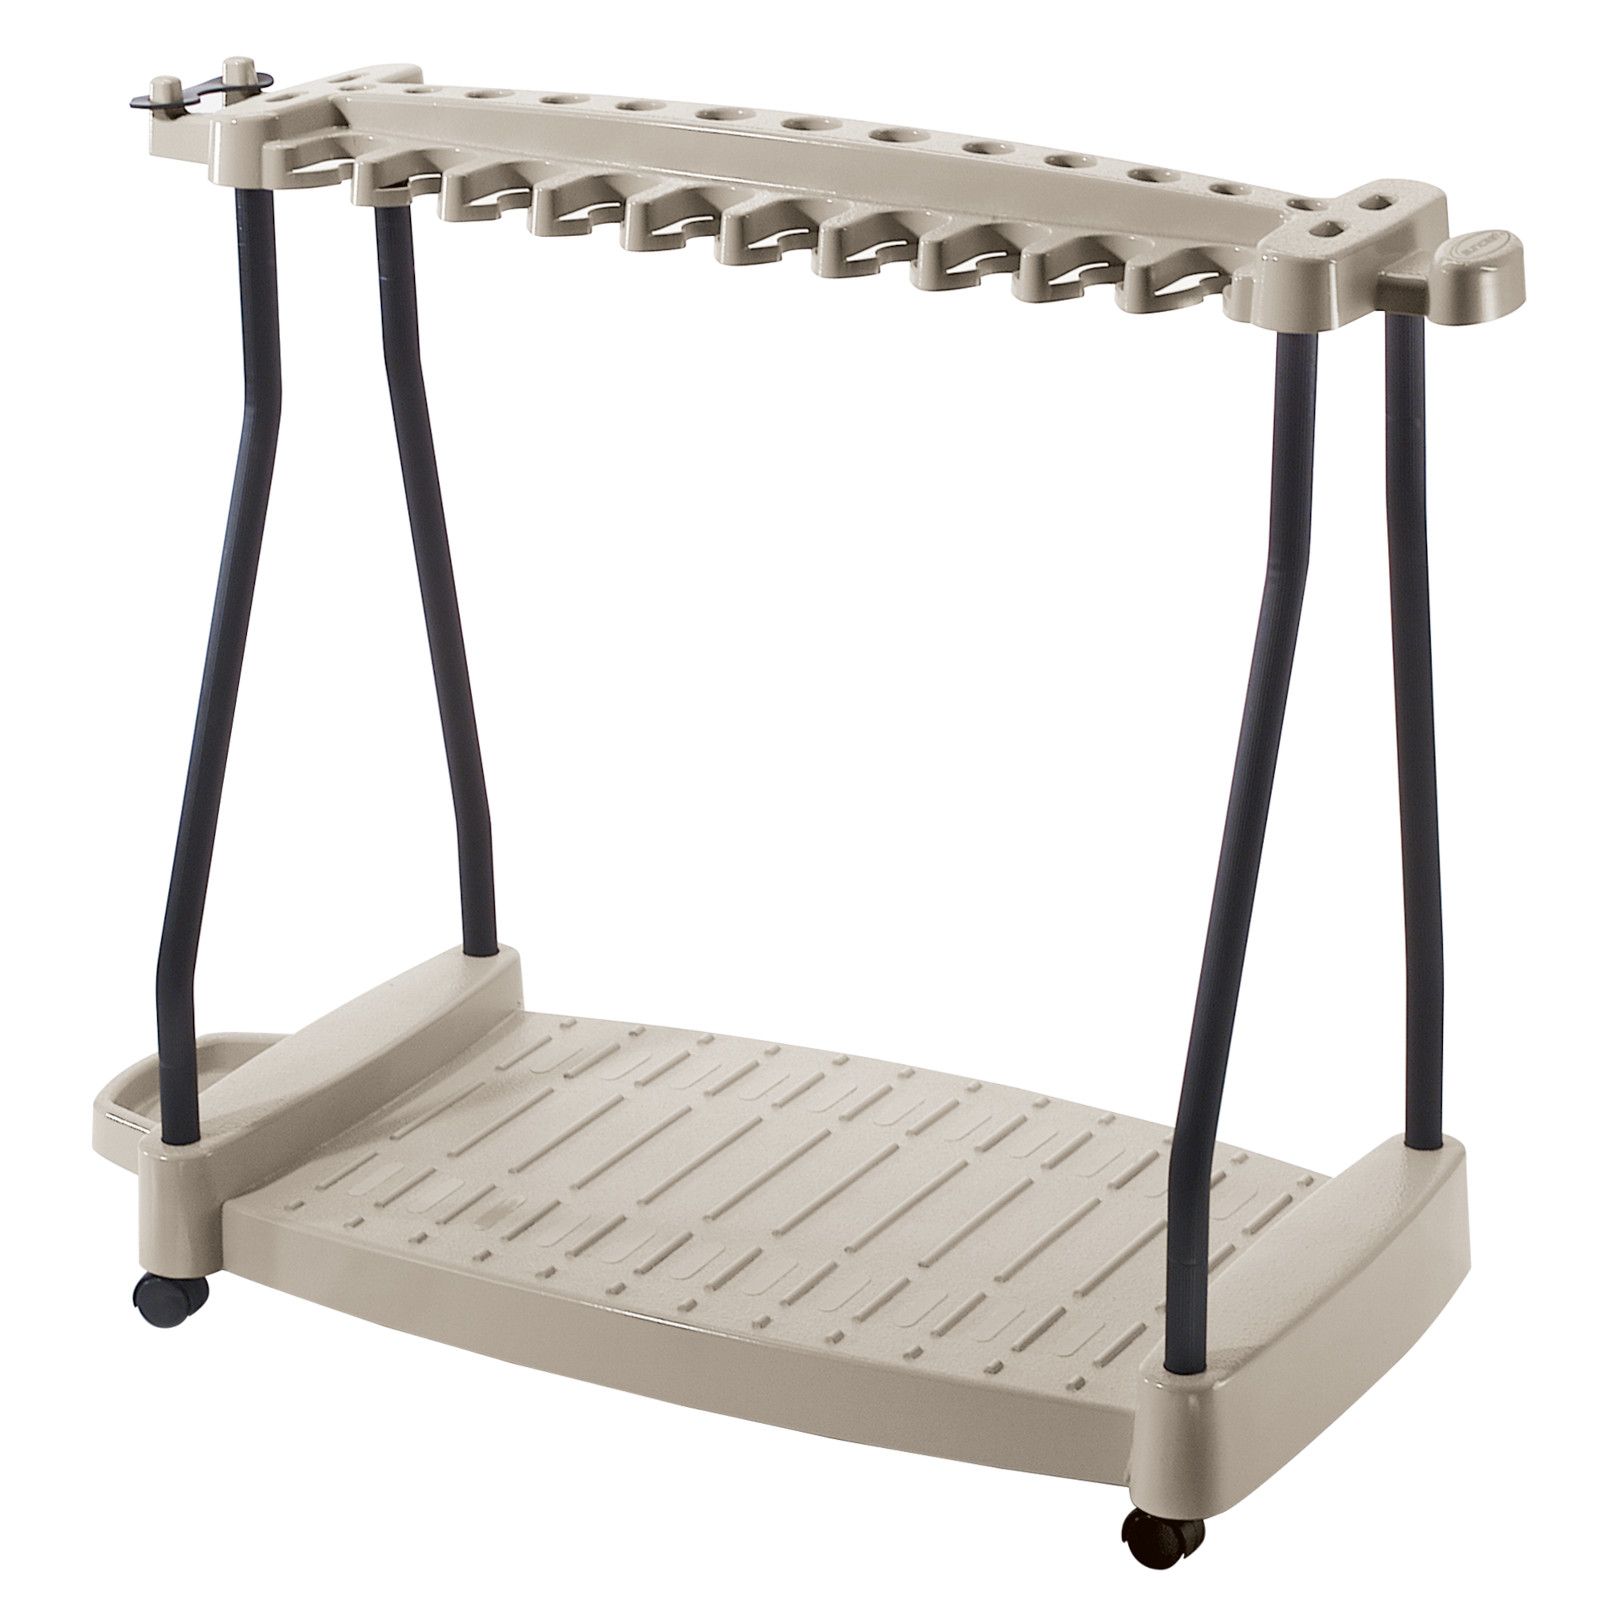 Suncast Lawn and Garden Steel Tool Storage Rack with Wheels for 30 Tools, Light Taupe - image 2 of 7